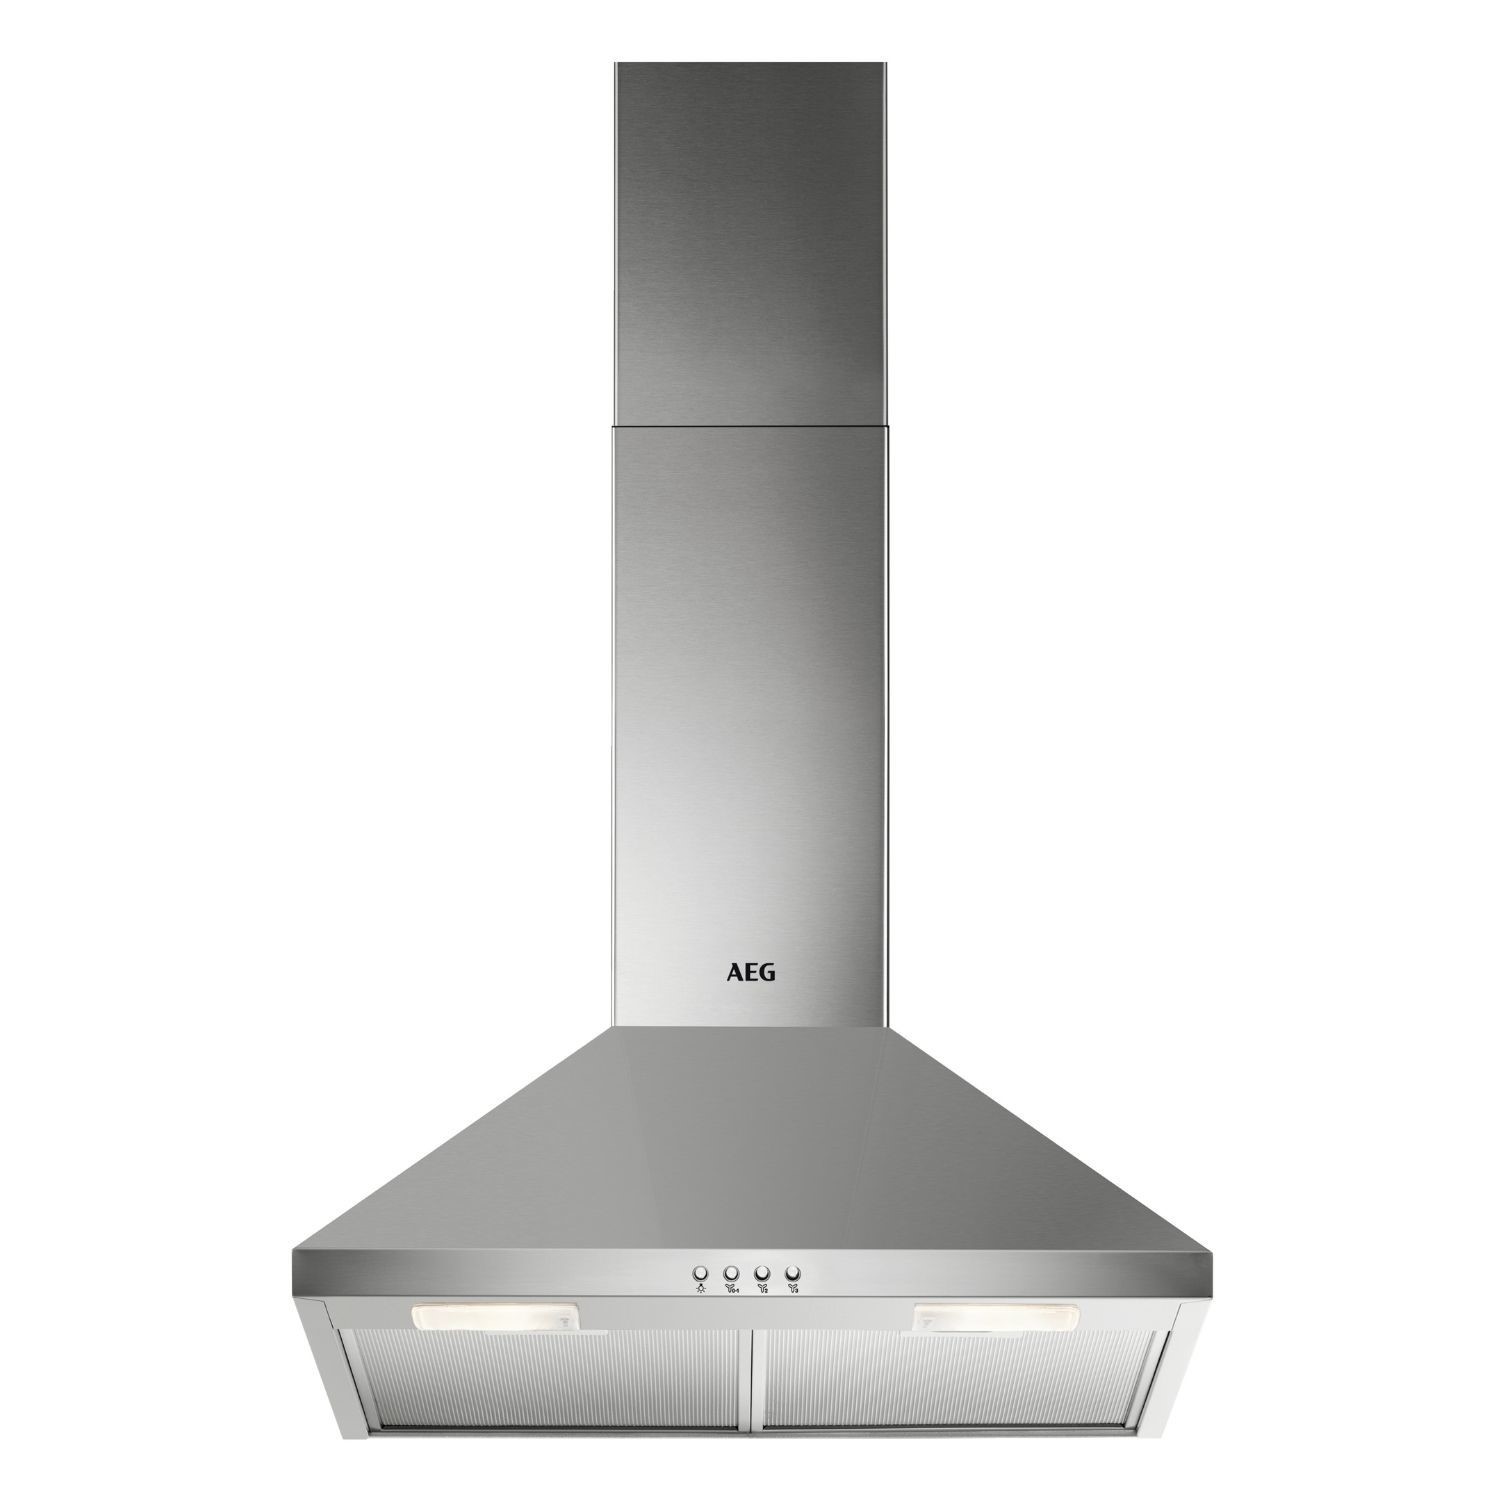 Photos - Other for Computer AEG 3000 LEDlights 60cm Chimney Cooker Hood - Stainless Steel DKX2630M 